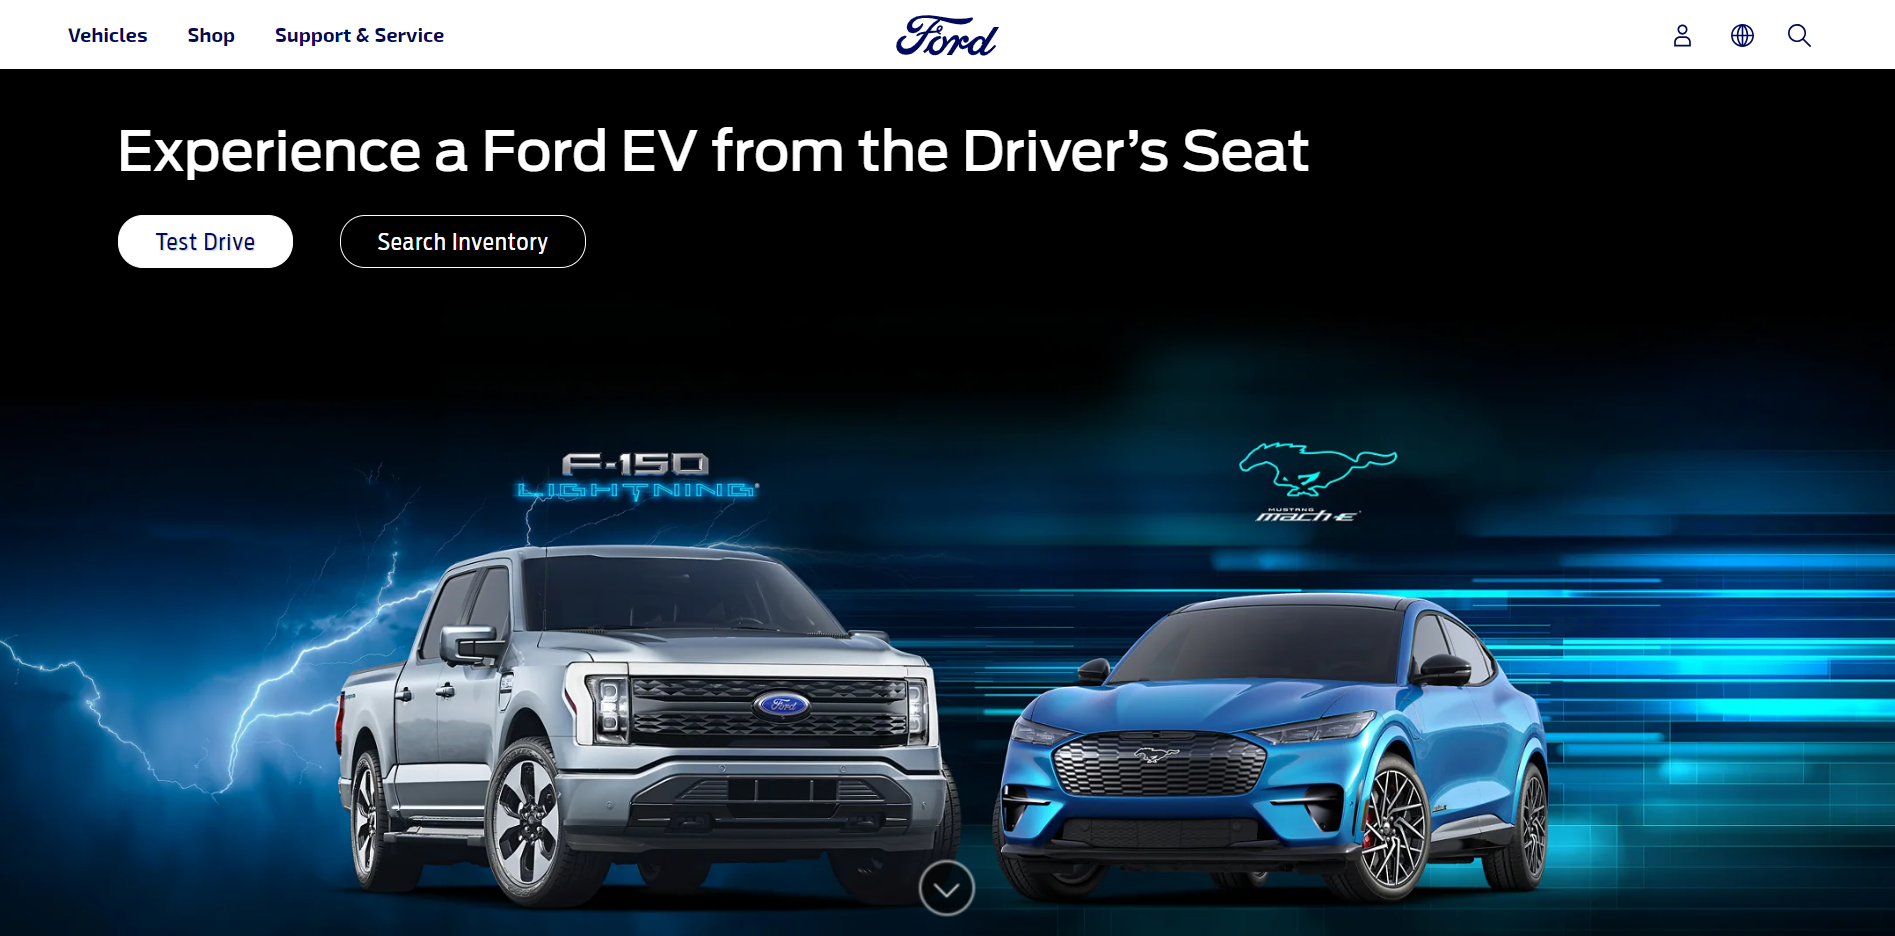 Ford's Evolution into a Mobility Company